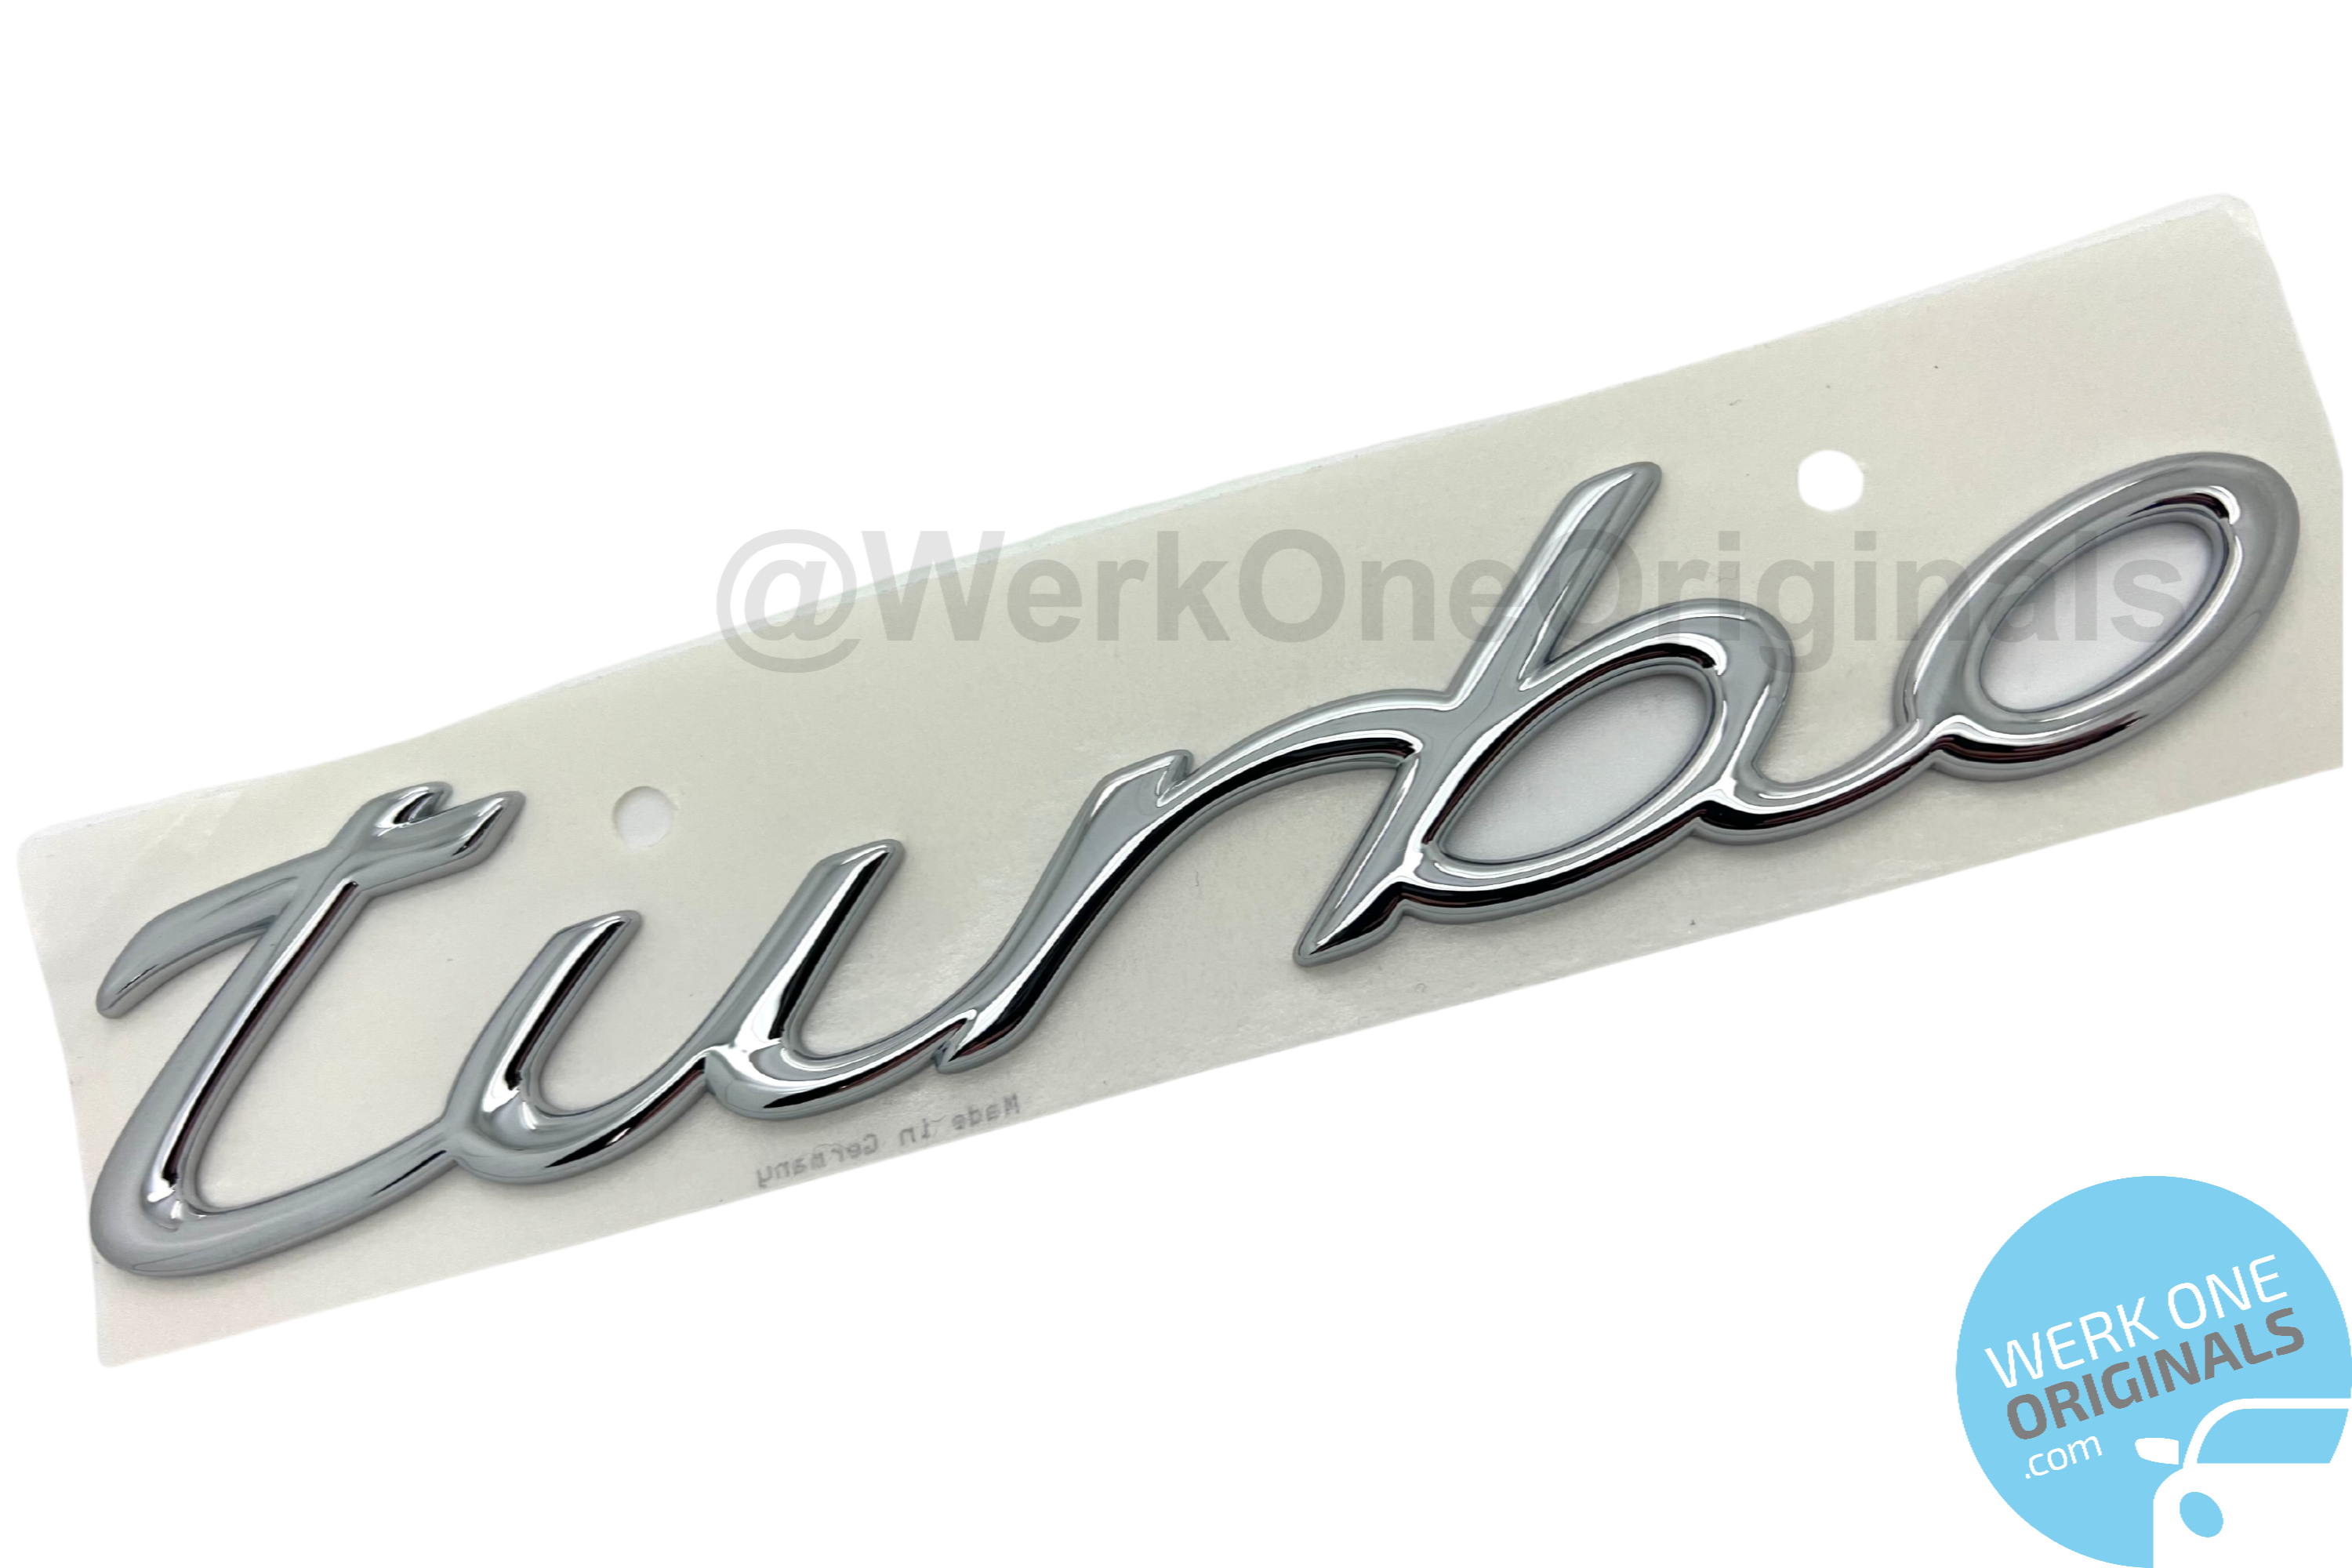 Porsche Official 'Turbo' Rear Badge Decal in Chrome Silver for 993 Turbo Models